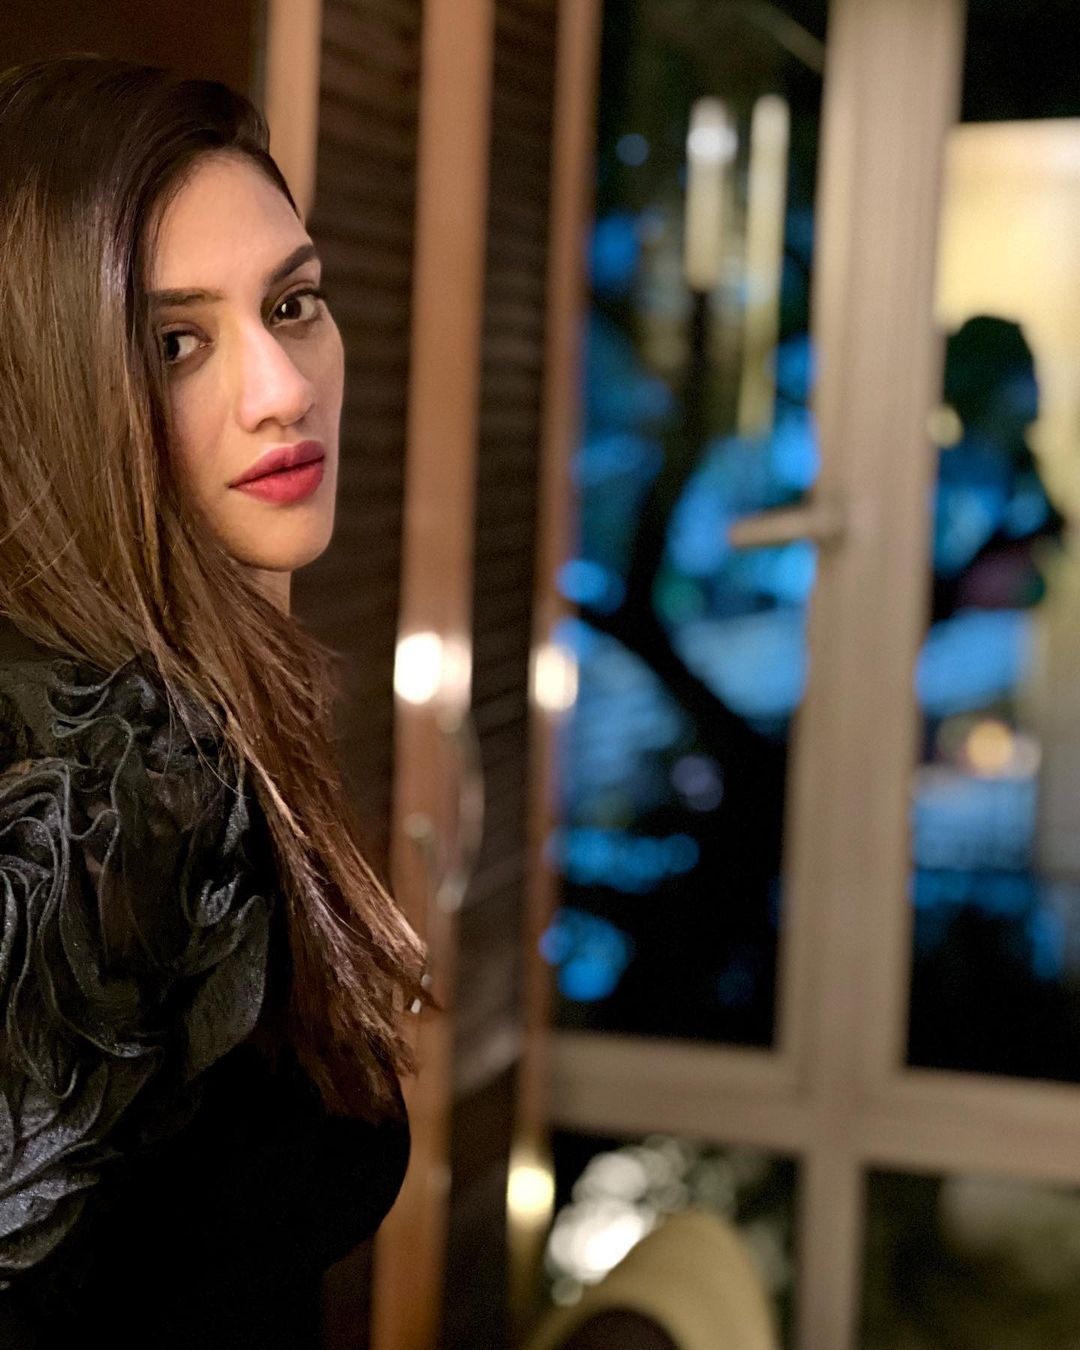 Nusrat Jahan Xx Video - Nusrat Jahan Looks Like a Dream in her Instagram Pictures; Check Out Bong  Beauty's Drop-dead Gorgeous Looks - News18